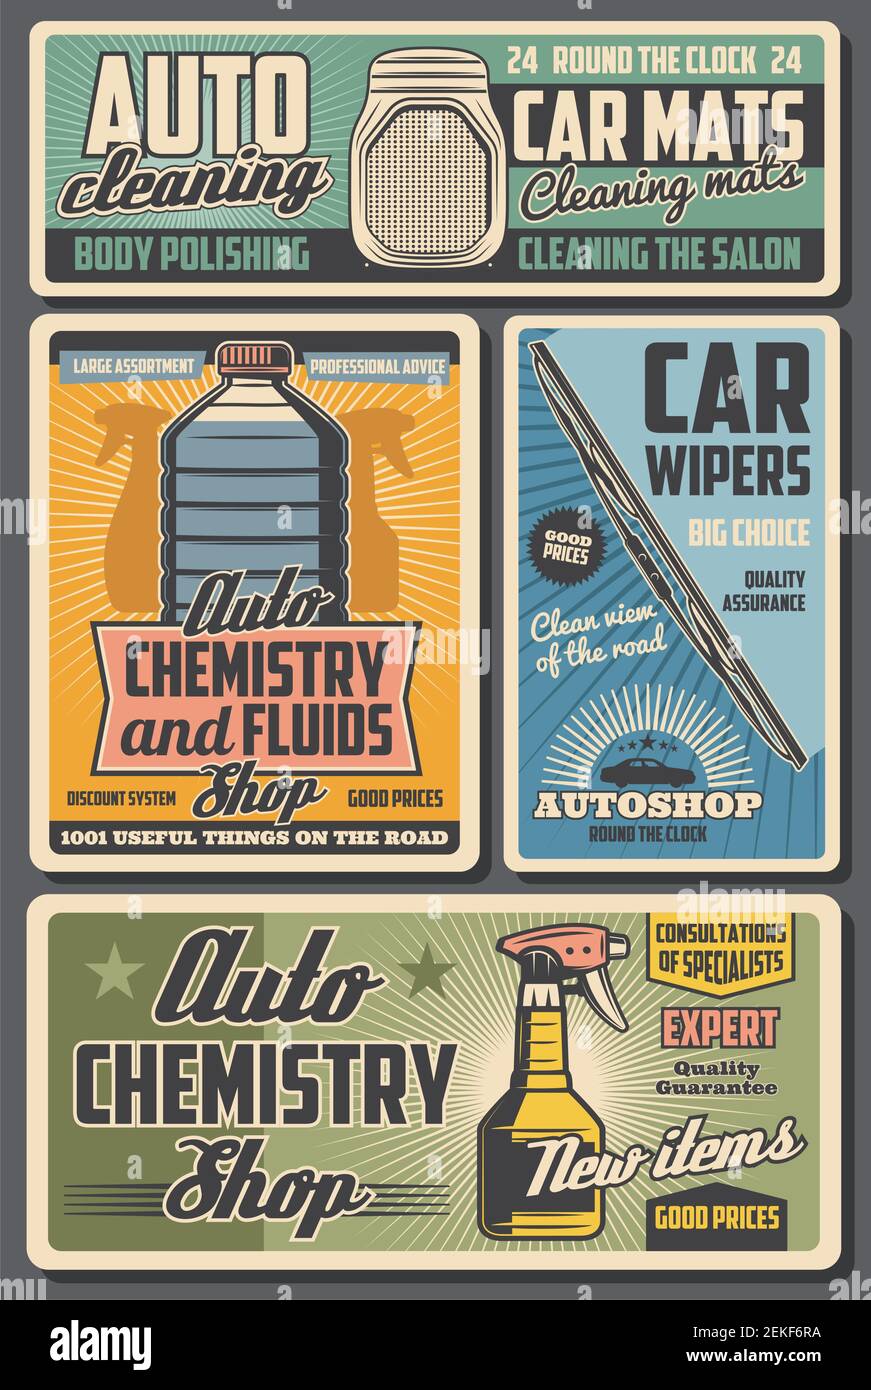 Automobile spare parts autoshop and car accessories vintage posters. Vector car service vehicle mats cleaning salon, auto chemistry fluids and windshi Stock Vector